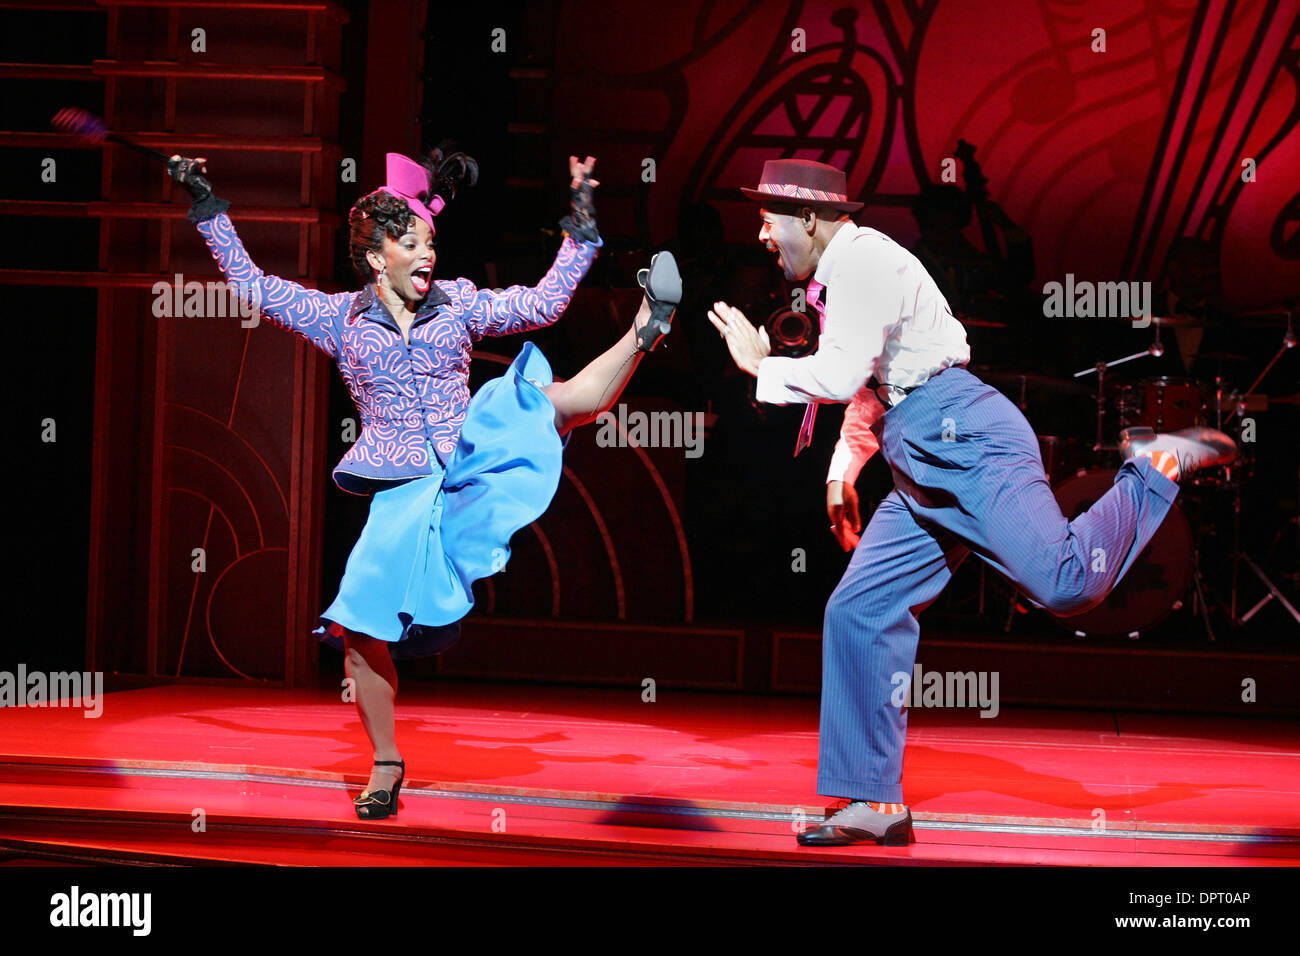 Apr 17, 2009 - Los Angeles, California, United States - (L to R) Artists DEBRA WALTON and EUGENE BARRY-HILL perform on stage during a dress rehearsal for the musical show 'Ain't Misbeavi' at the Ahmanson Theatre. (Credit Image: © Ringo Chiu/ZUMA Press) Stock Photo